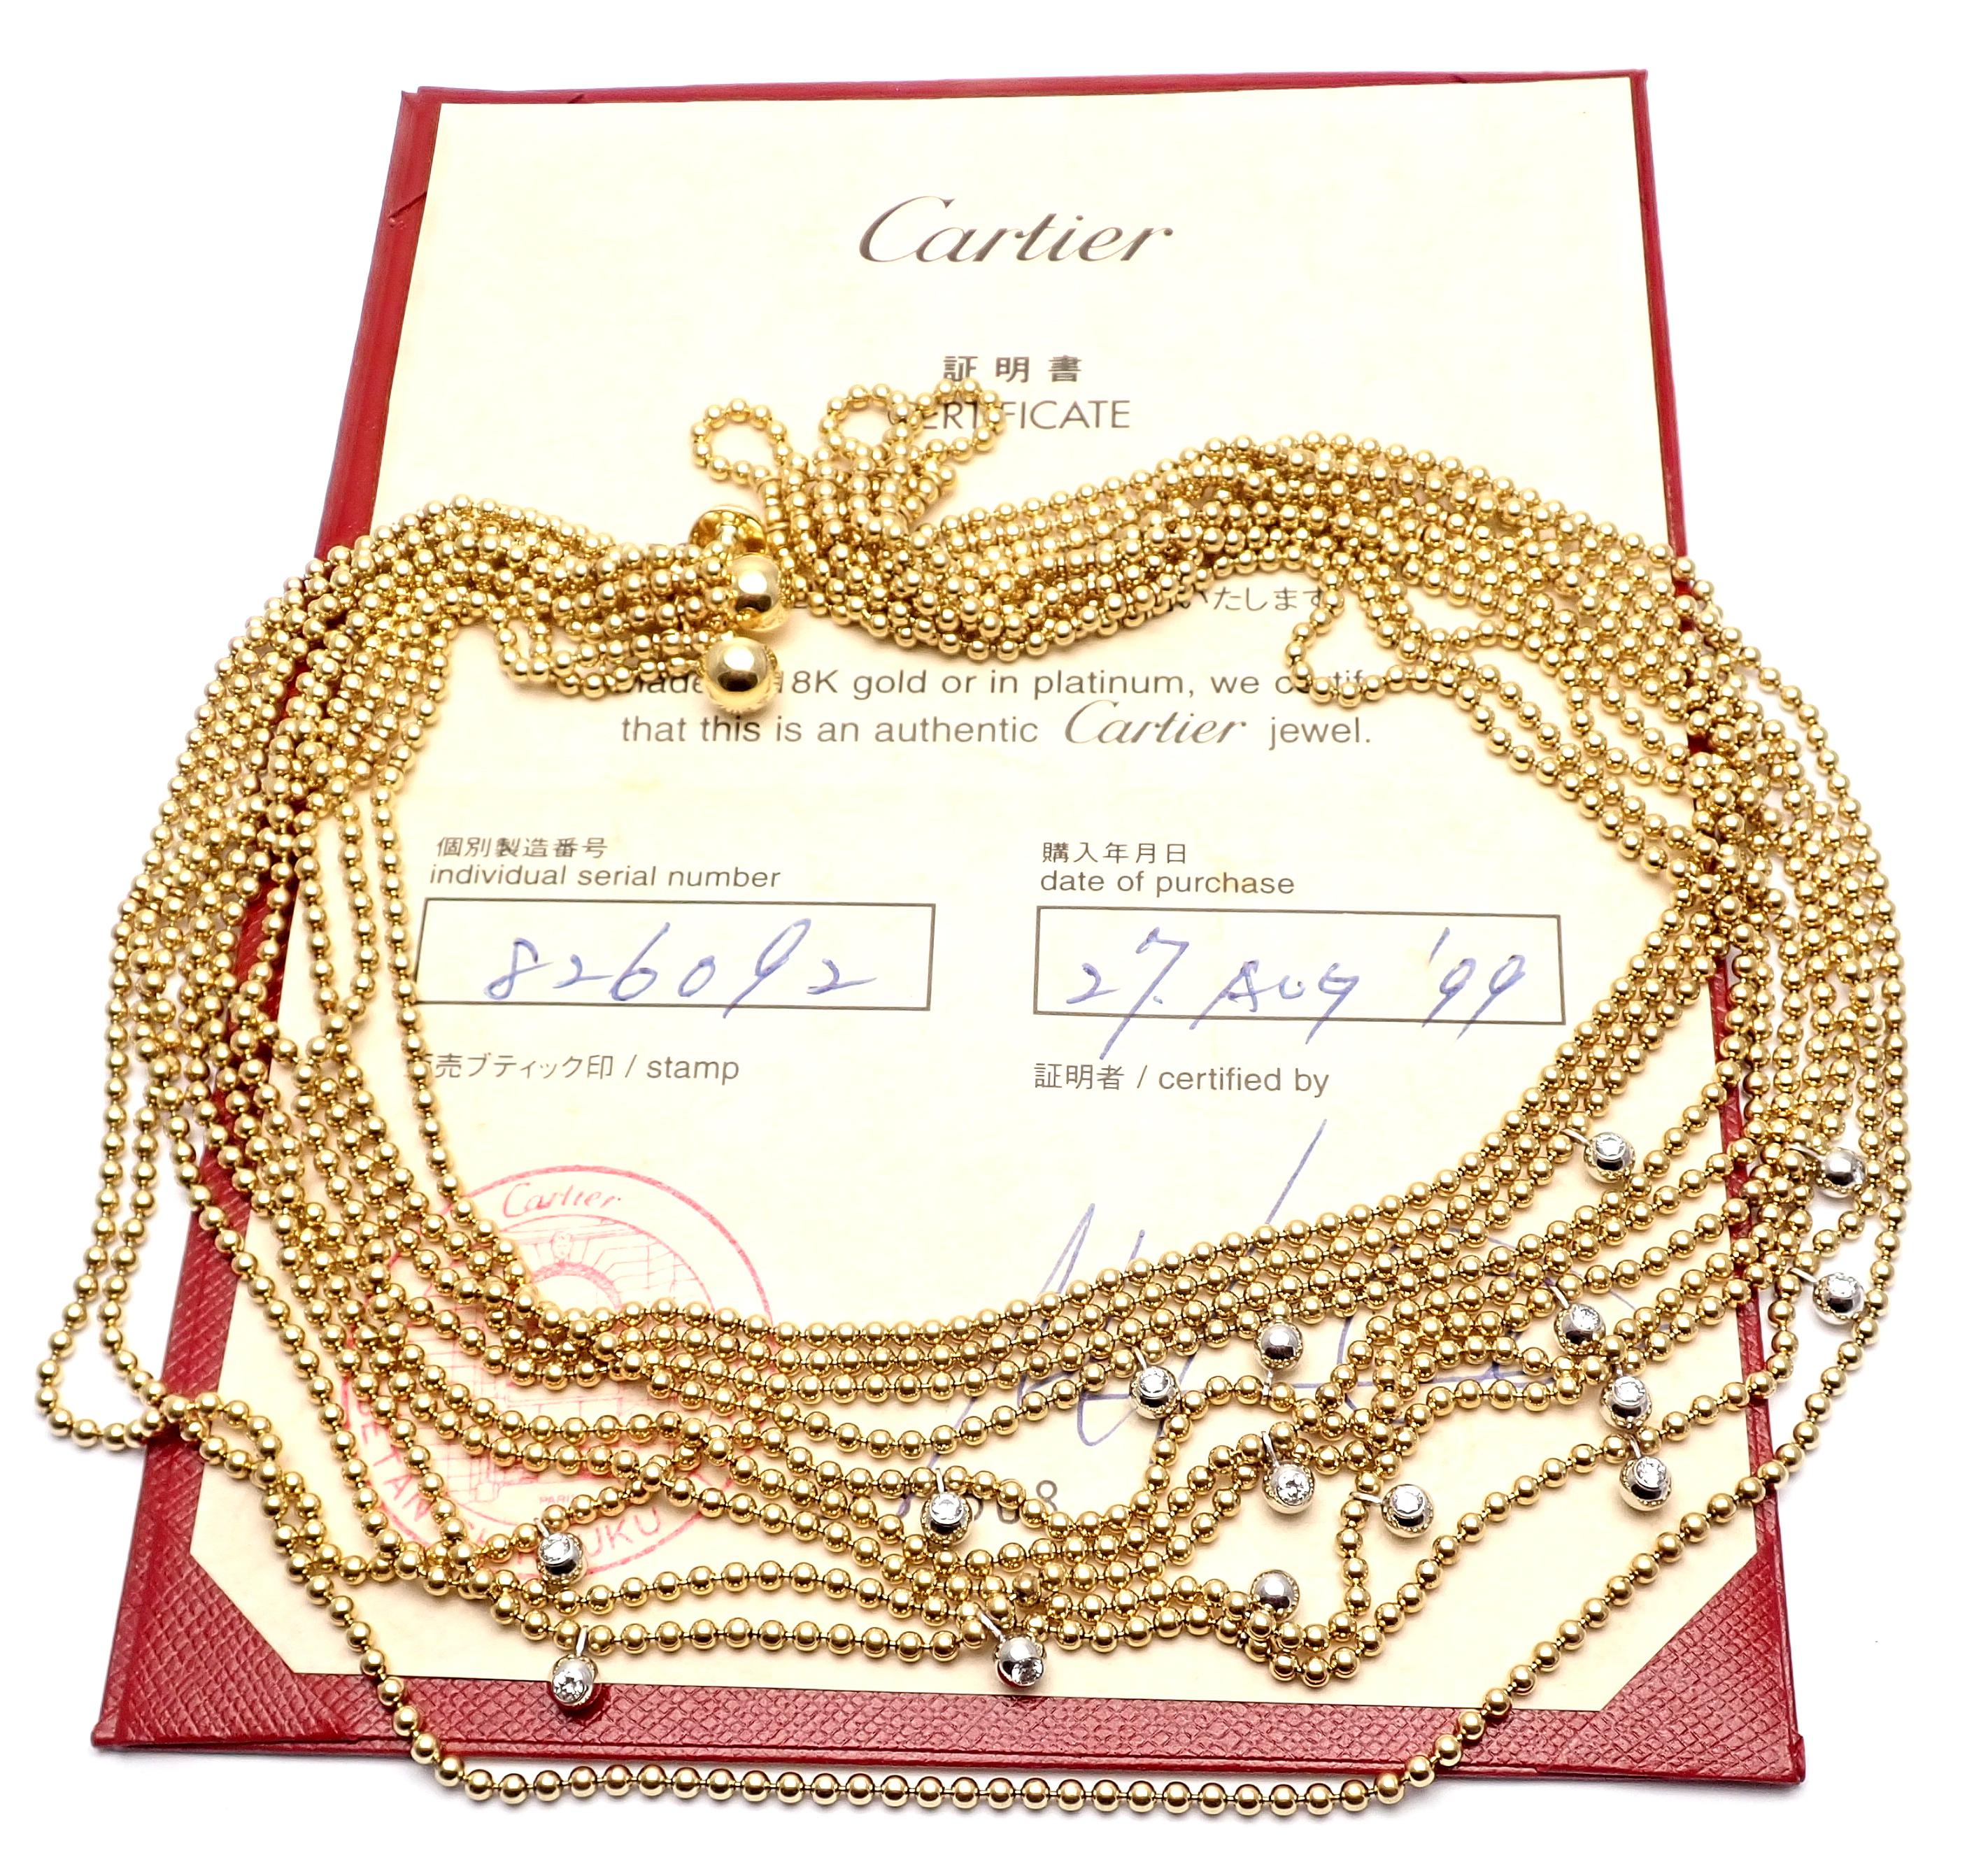 18k Yellow Gold Diamond Draperie de Decollete Link Necklace by Cartier. 
With 15 round brilliant cut diamonds VVS1 clarity, E color total weight approx. 1ctw
This necklace comes with Cartier certificate of authenticity.
Details: 
Length: 16